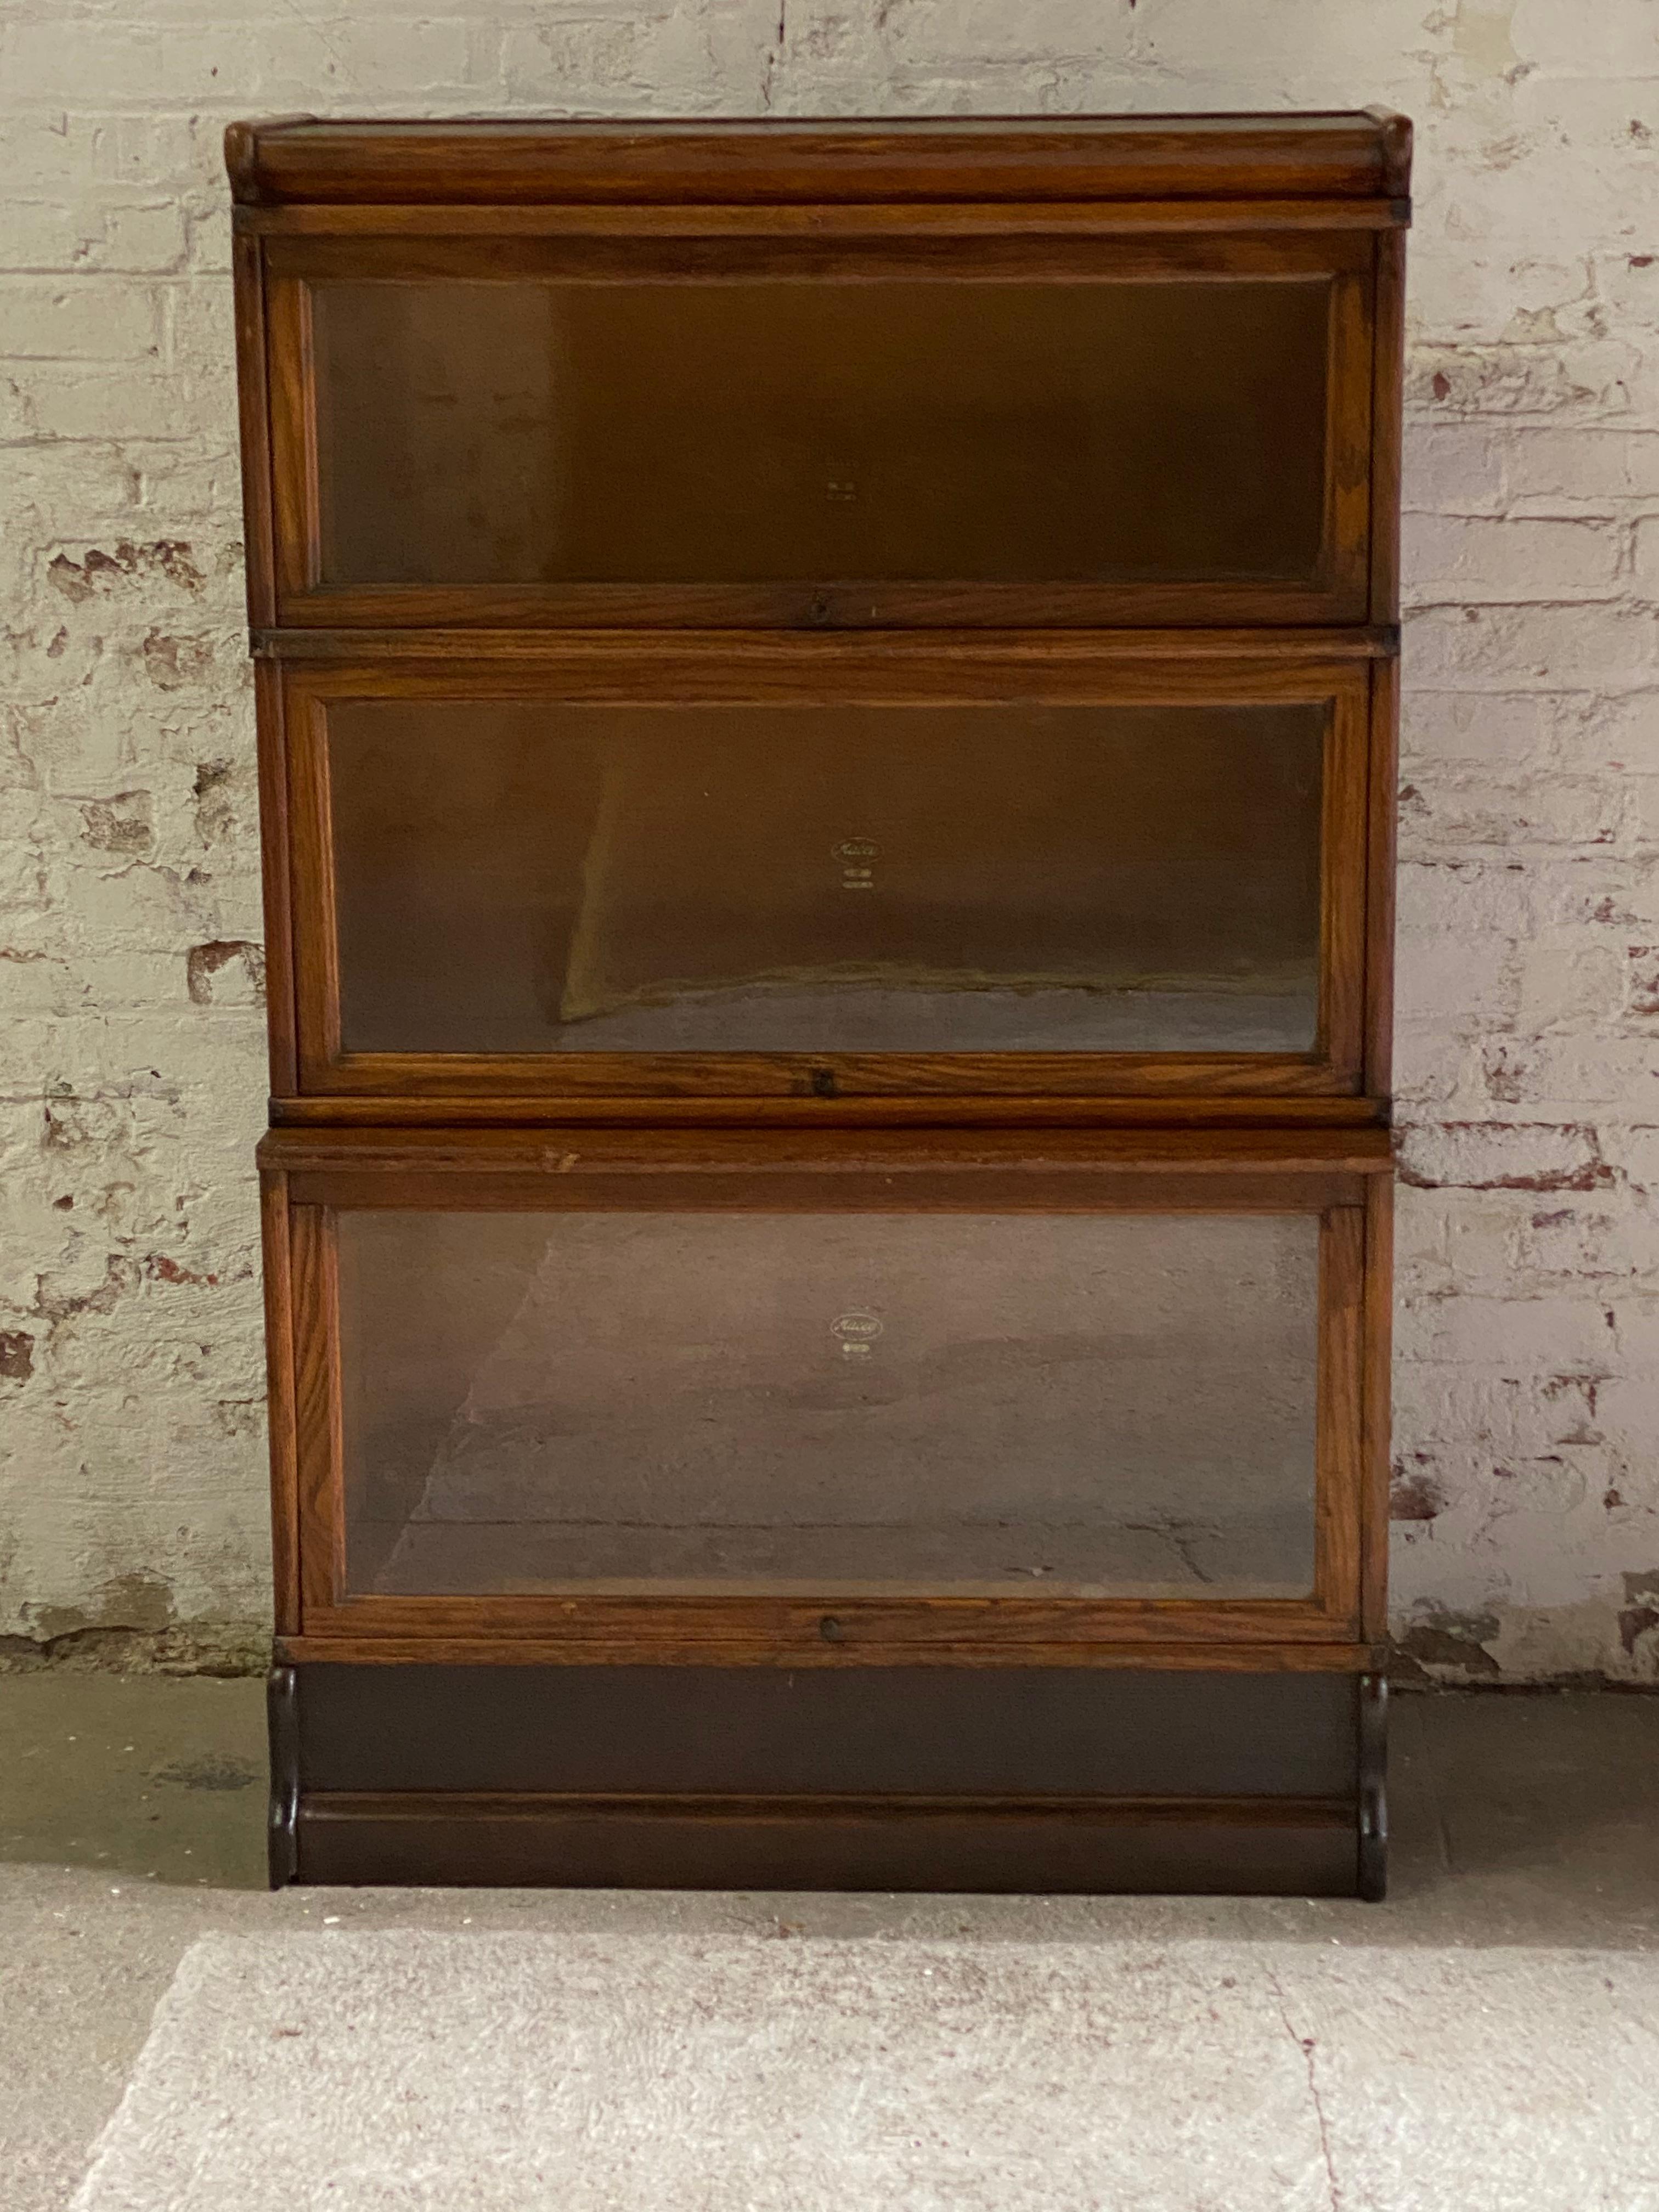 Macey three stack barrister bookcase with copper flashed japanned hardware. Three stack compartments with a base and top. Original dark finish, circa 1910-1920. The bottom component is the largest with interior measurements approximately 12.5